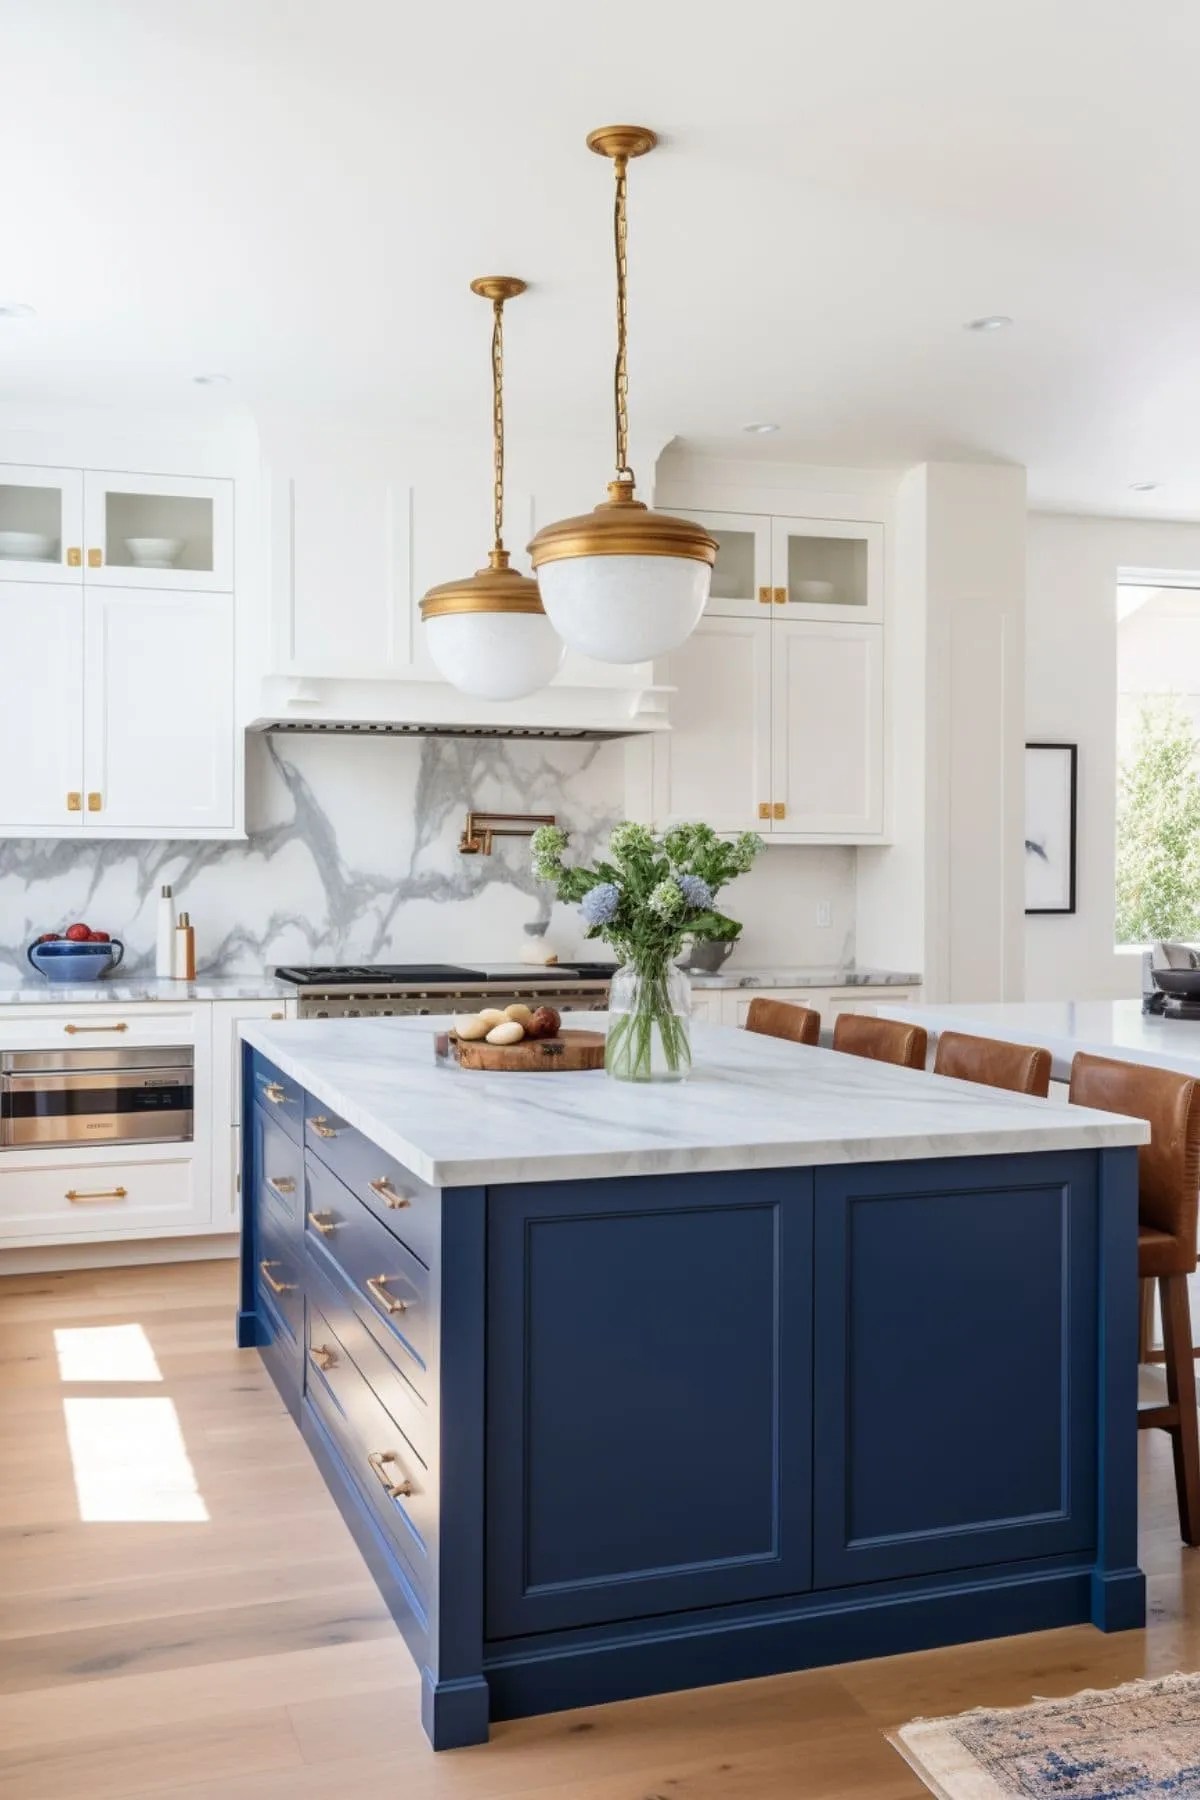 Personalized Cooking Spaces: Tips for a Tailored Kitchen Remodel